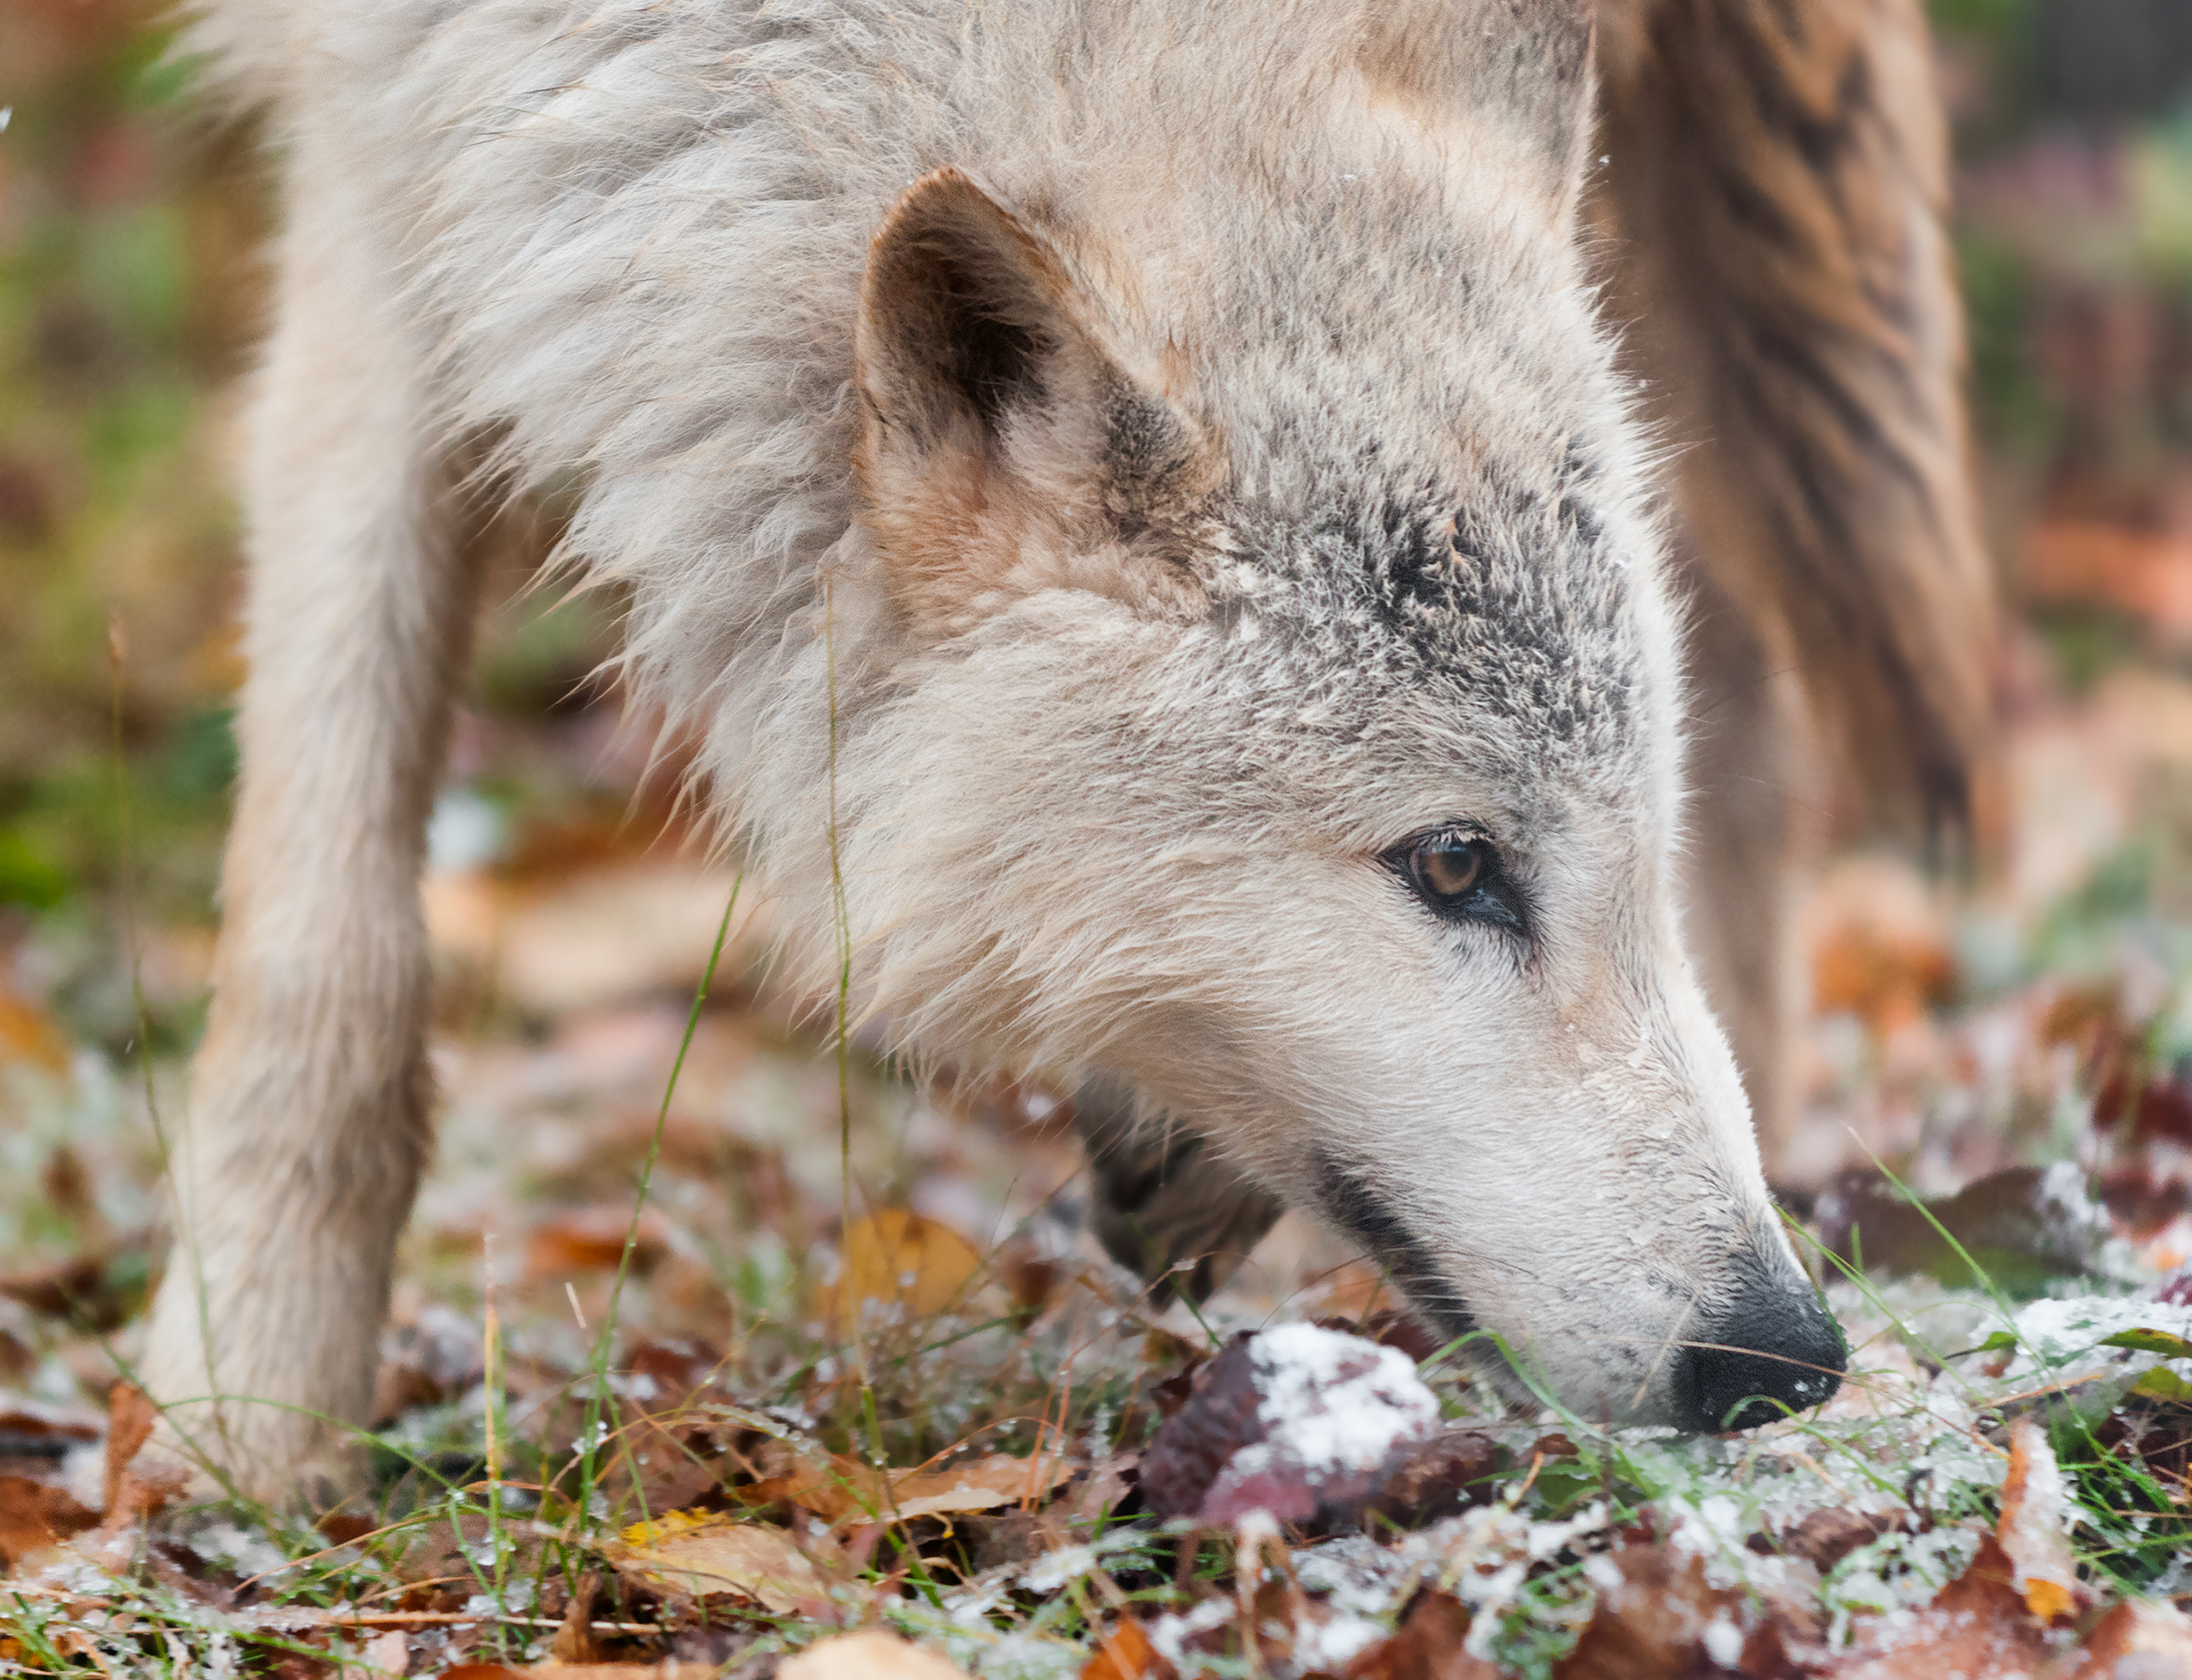 If wolves don't fear snake odors, that may suggest a lack of evolutionary importance of snakebite—or that the snakes have evolved a way of hiding their scent. Photo Credit: Holly Kuchera/Shutterstock